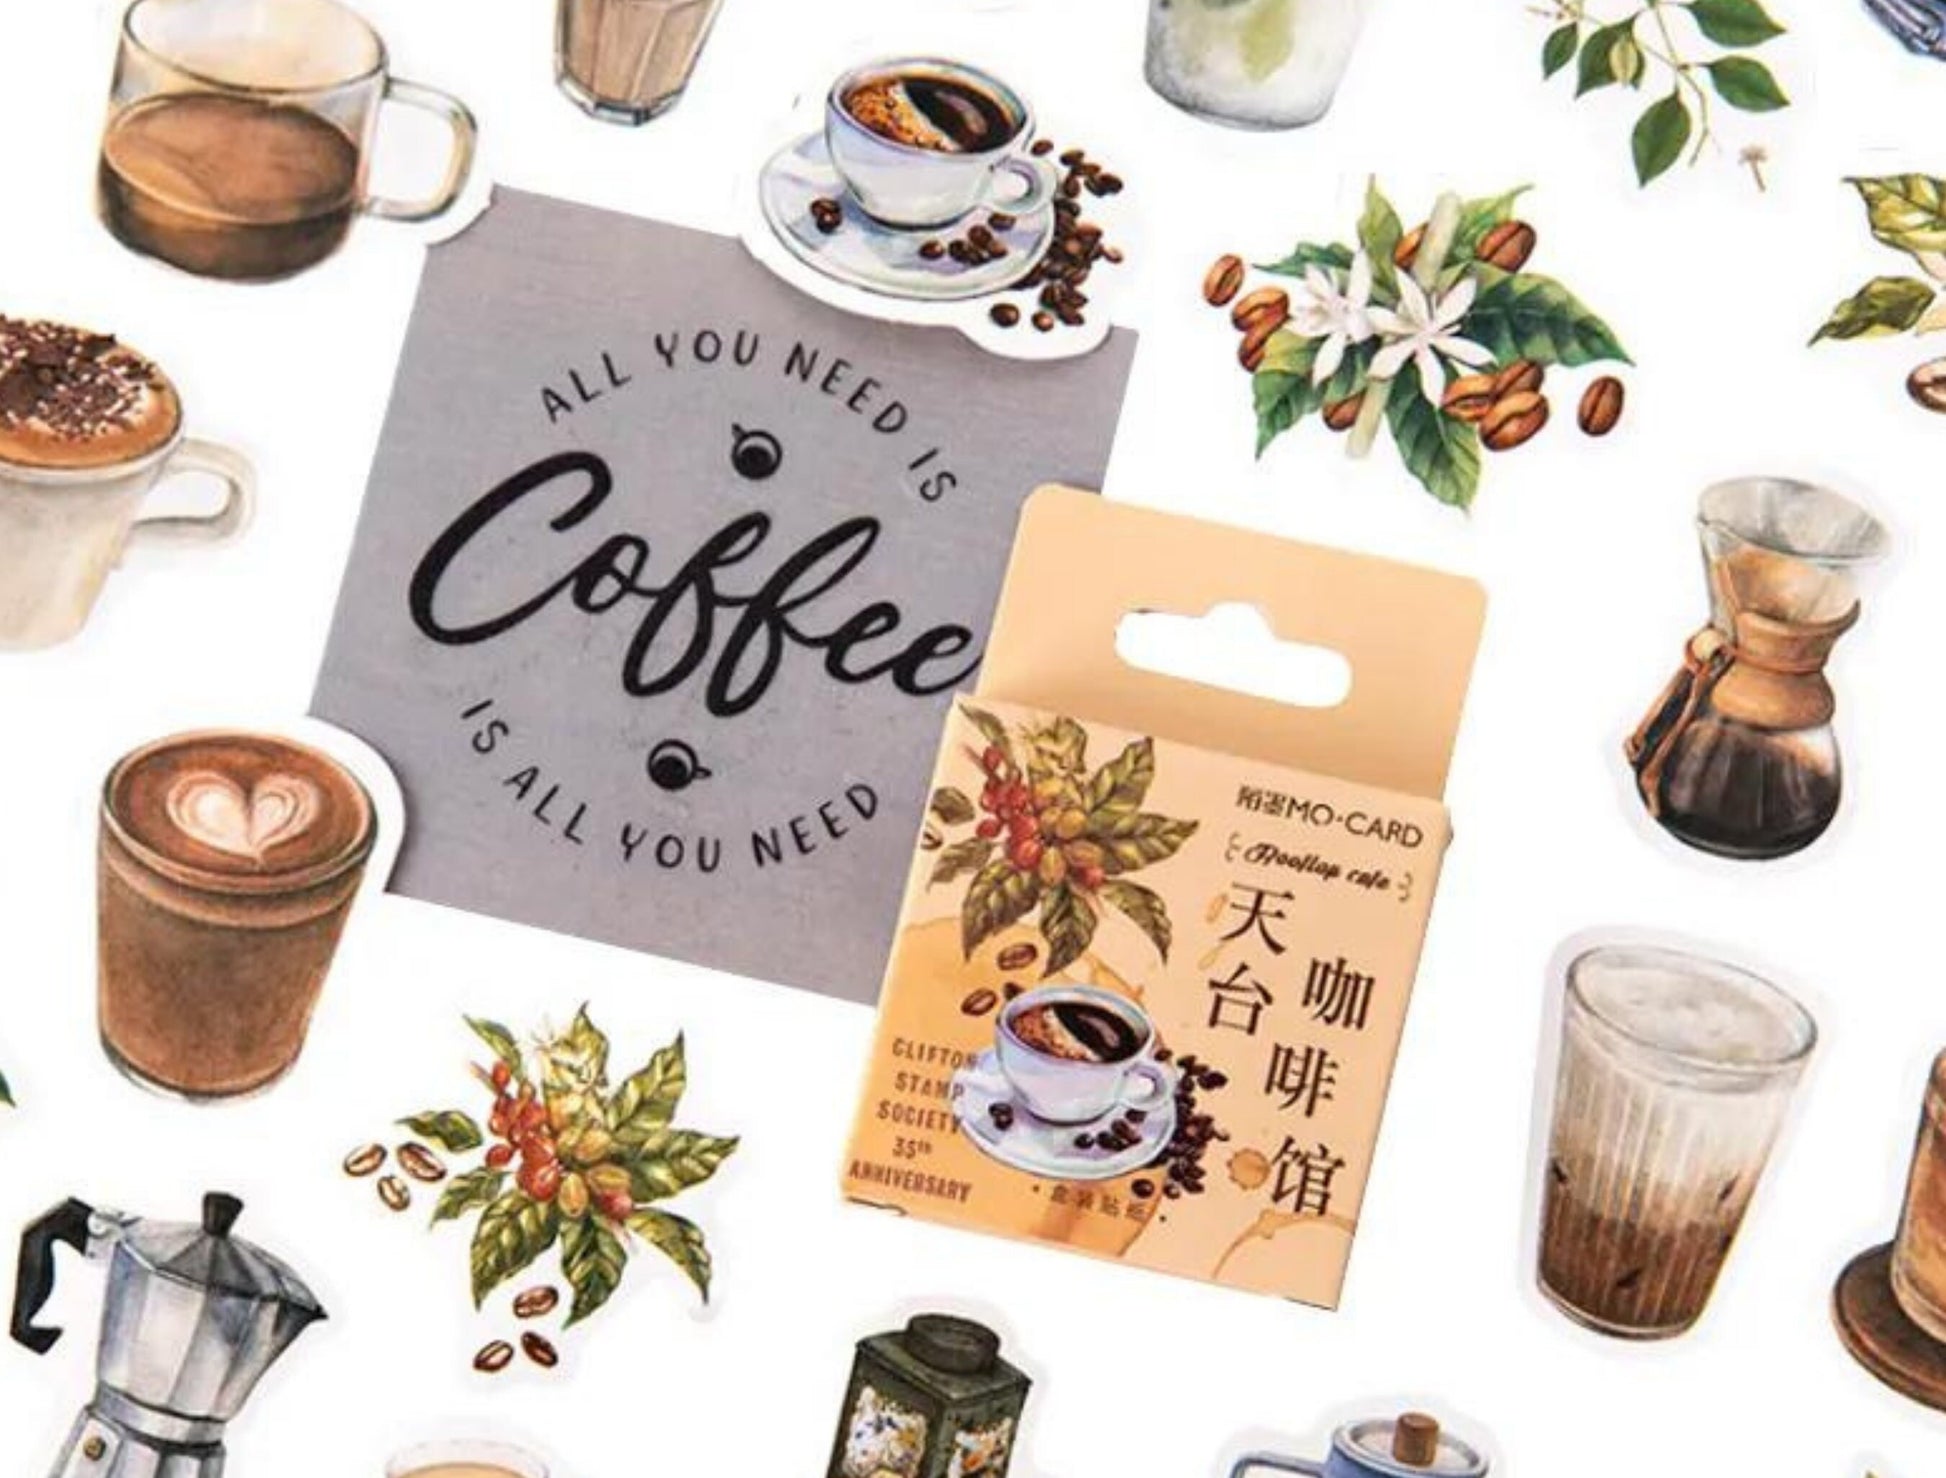 46 Pieces Coffee Stickers, Latte Art Stickers, Matcha Stickers, Cute Stickers, Coffee Bean Stickers, Coldbrew Stickers